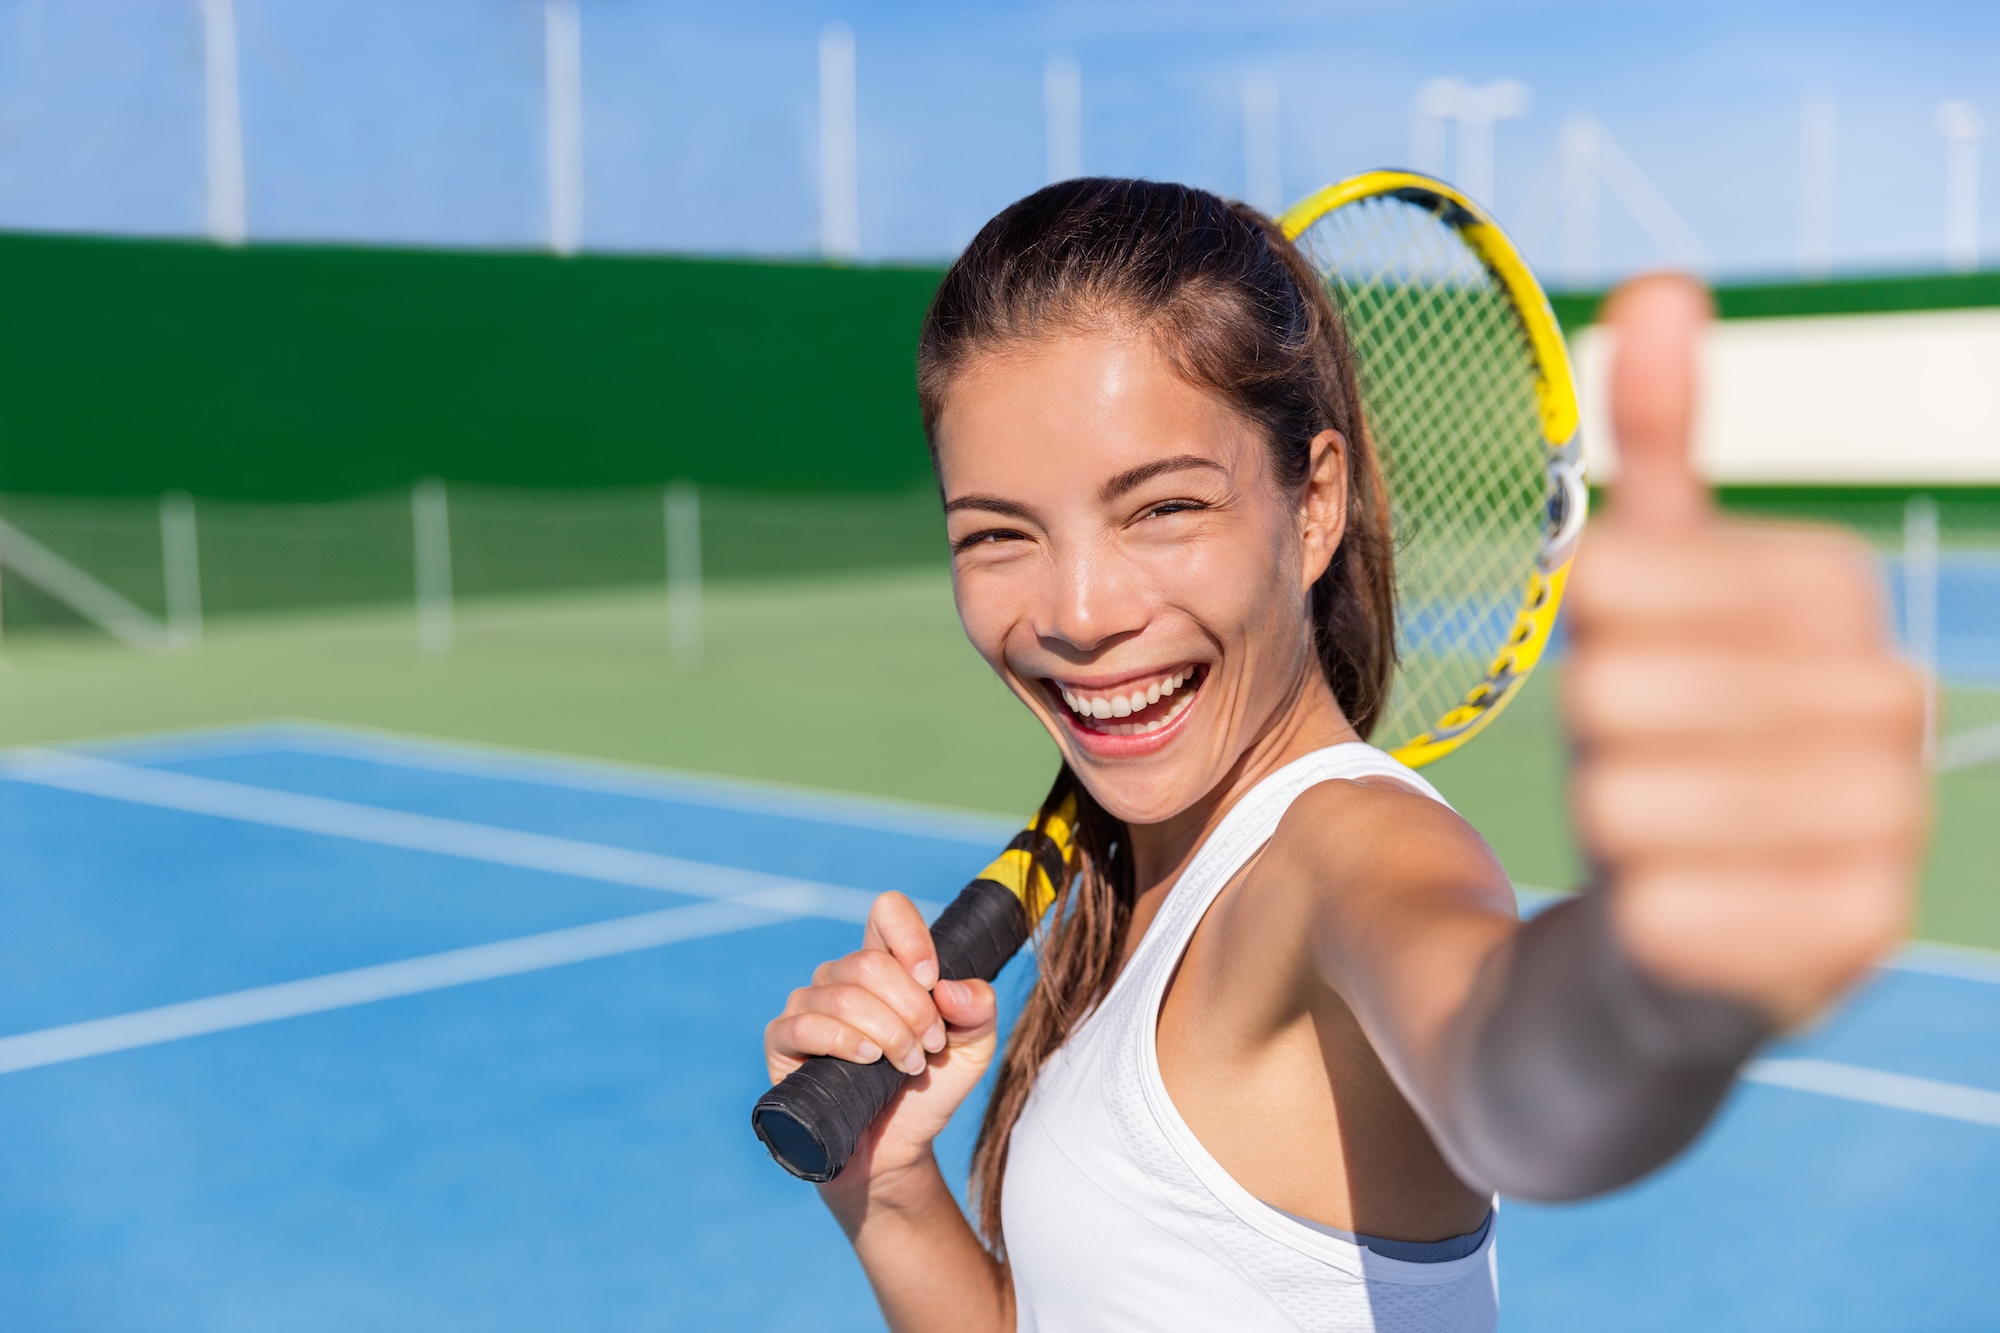 Here’s where to learn tennis in Macao